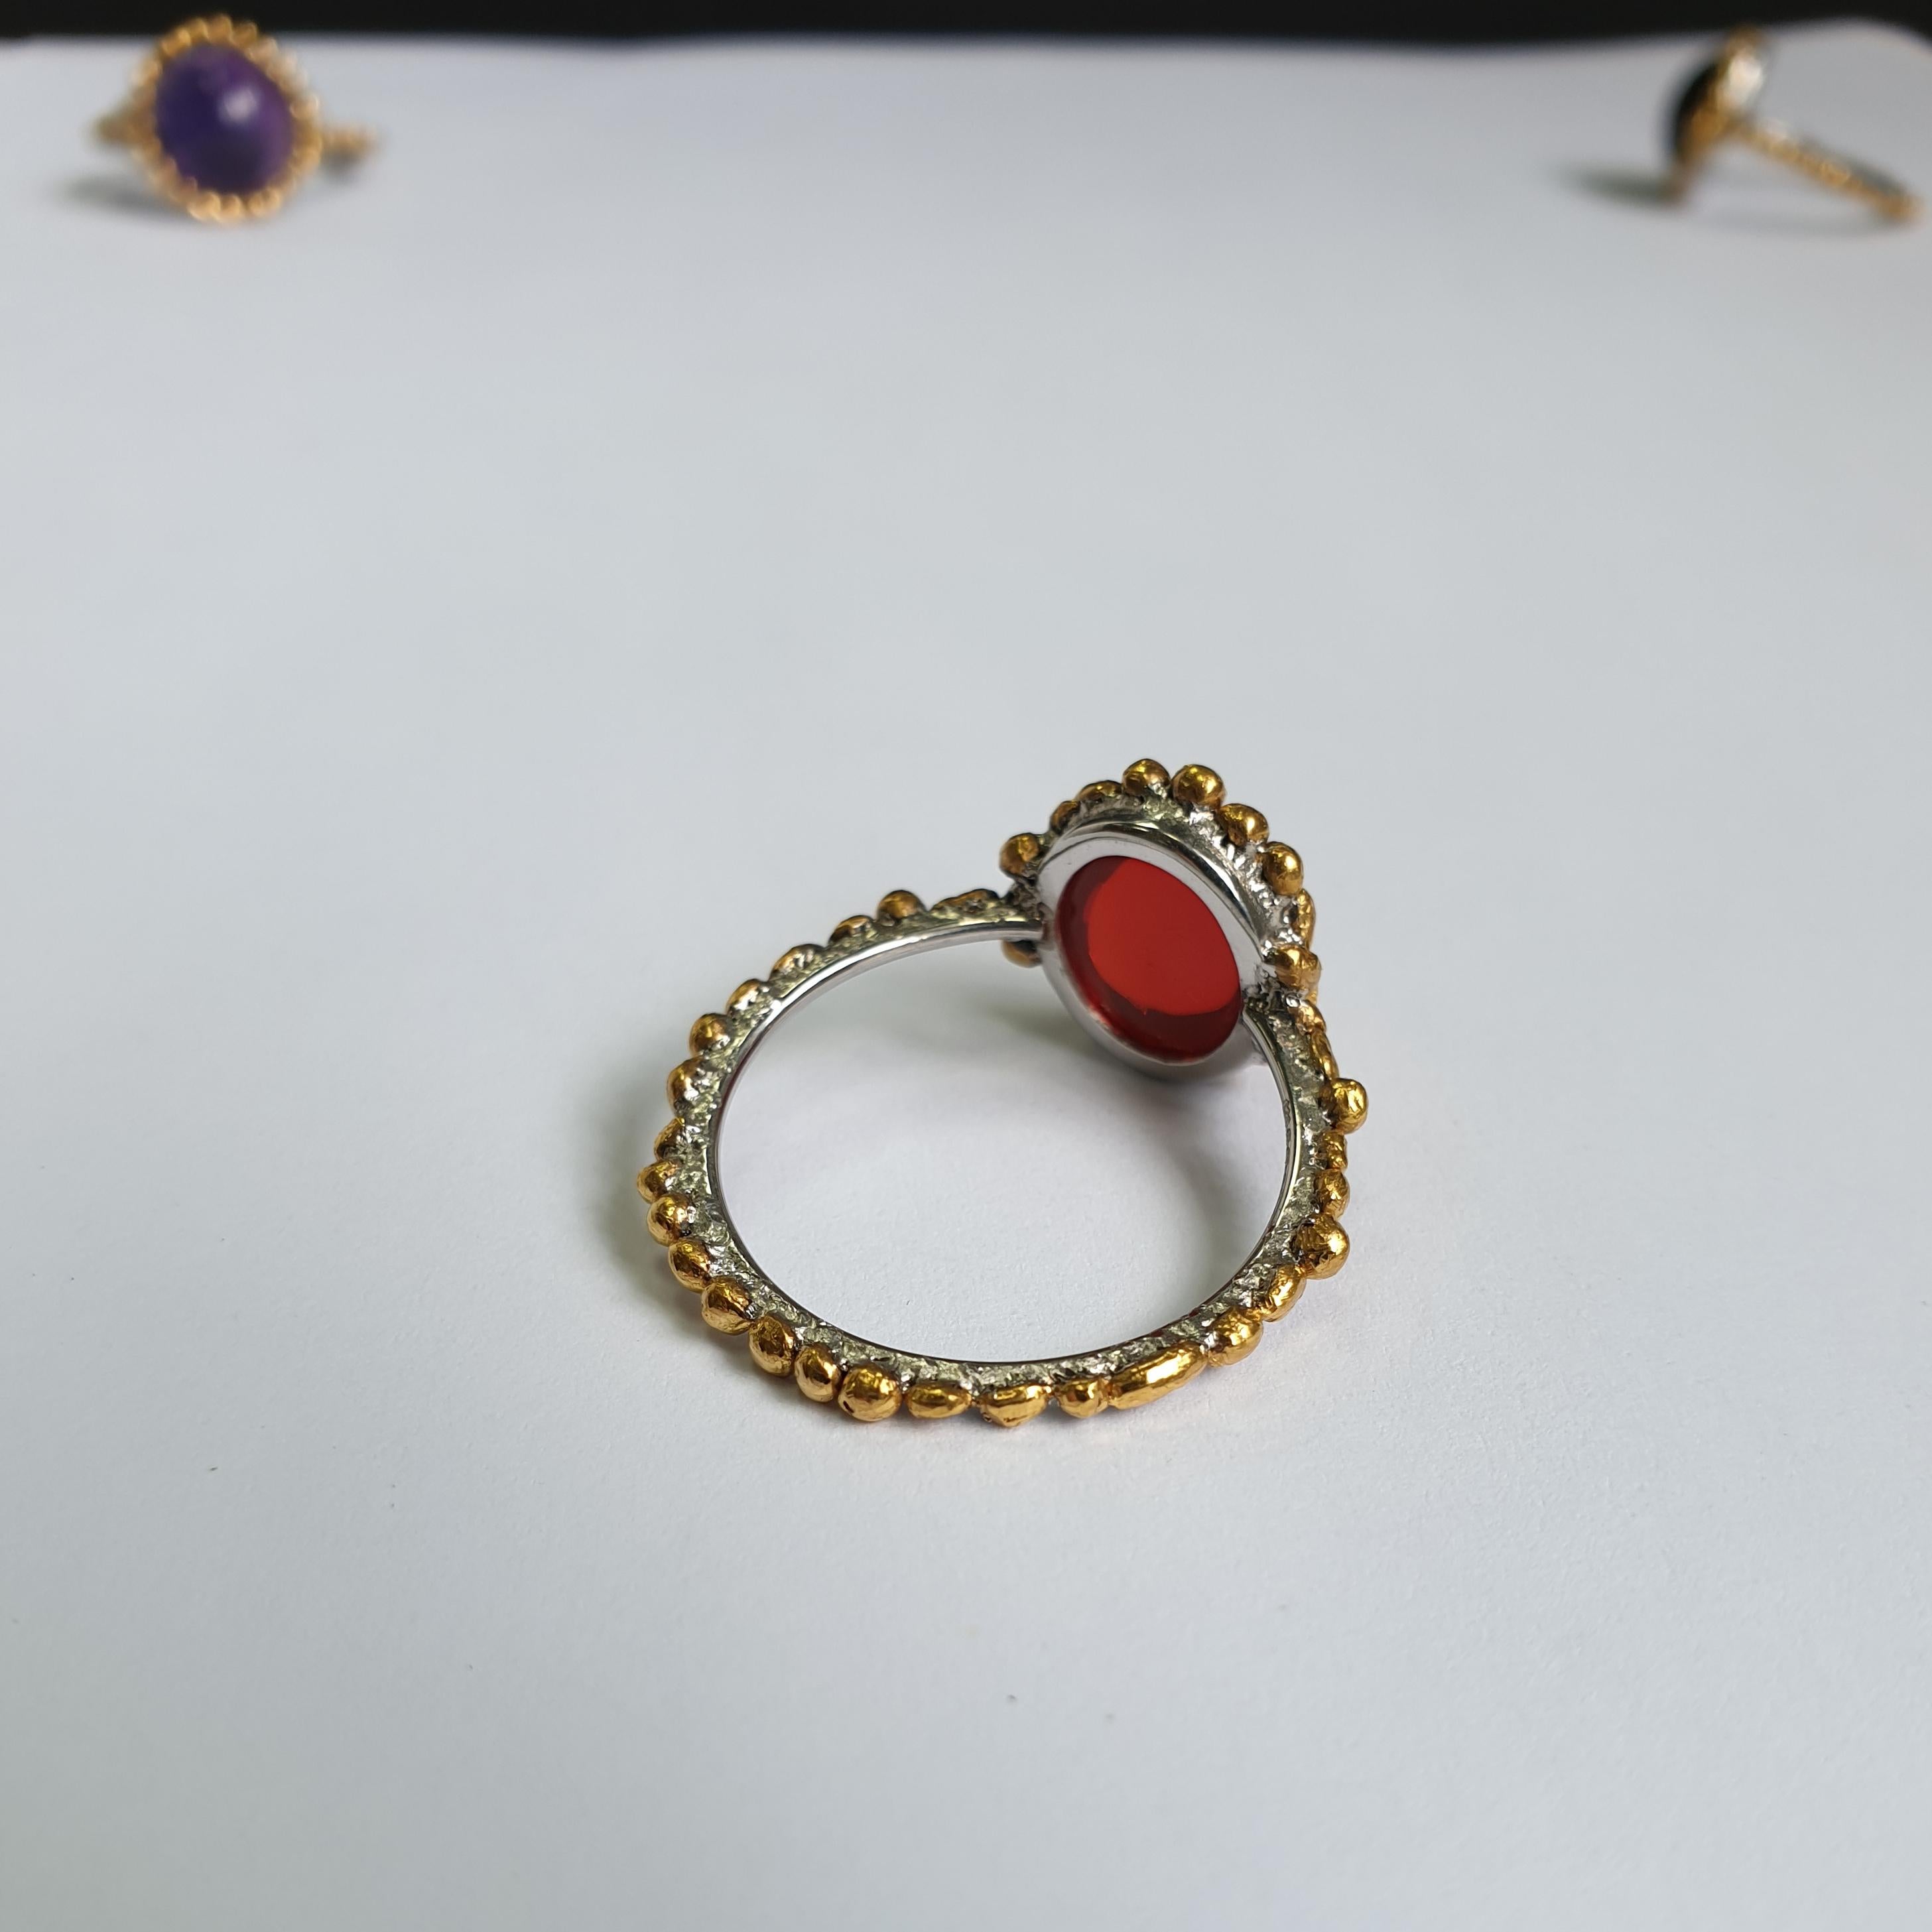 Oval Fire Opal Ring Made in Platinum and 24 Karat Gold In New Condition For Sale In London, London